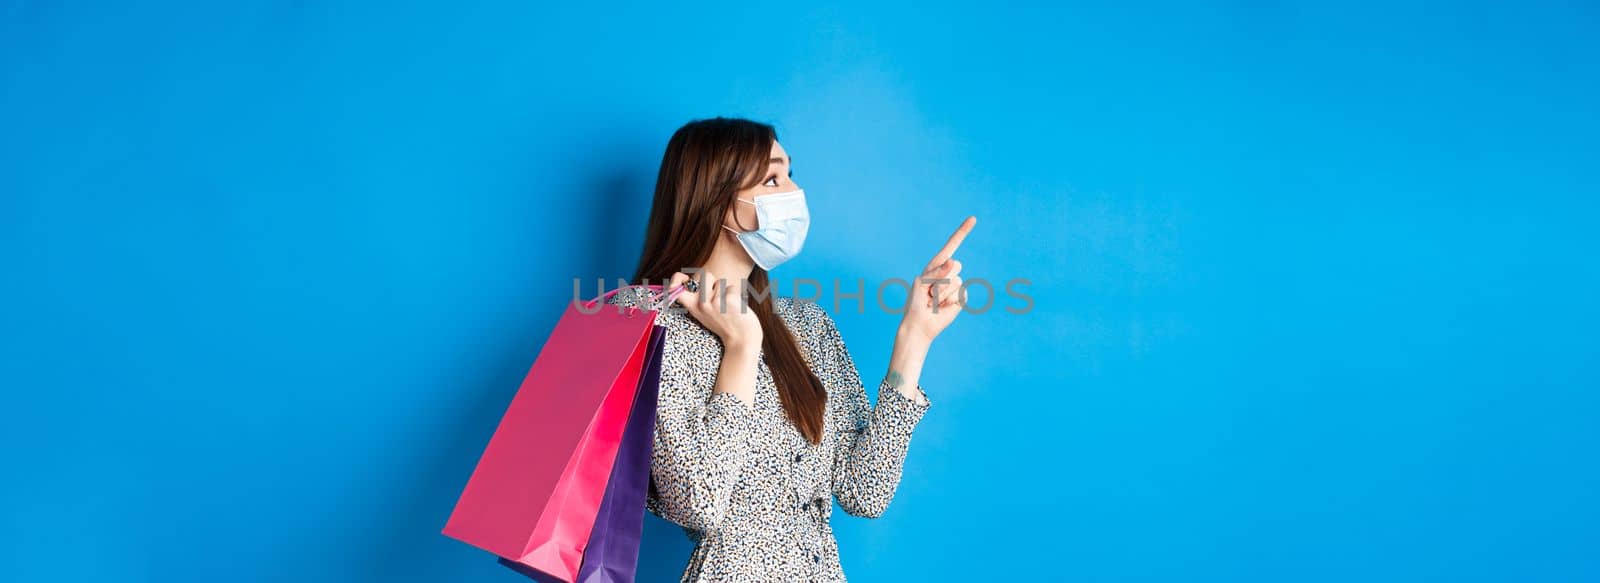 Covid-19, pandemic and lifestyle concept. Profile of excited girl wears medical mask on shopping, pointing and looking at upper left corner logo, holding purchases over shoulder, blue background by Benzoix